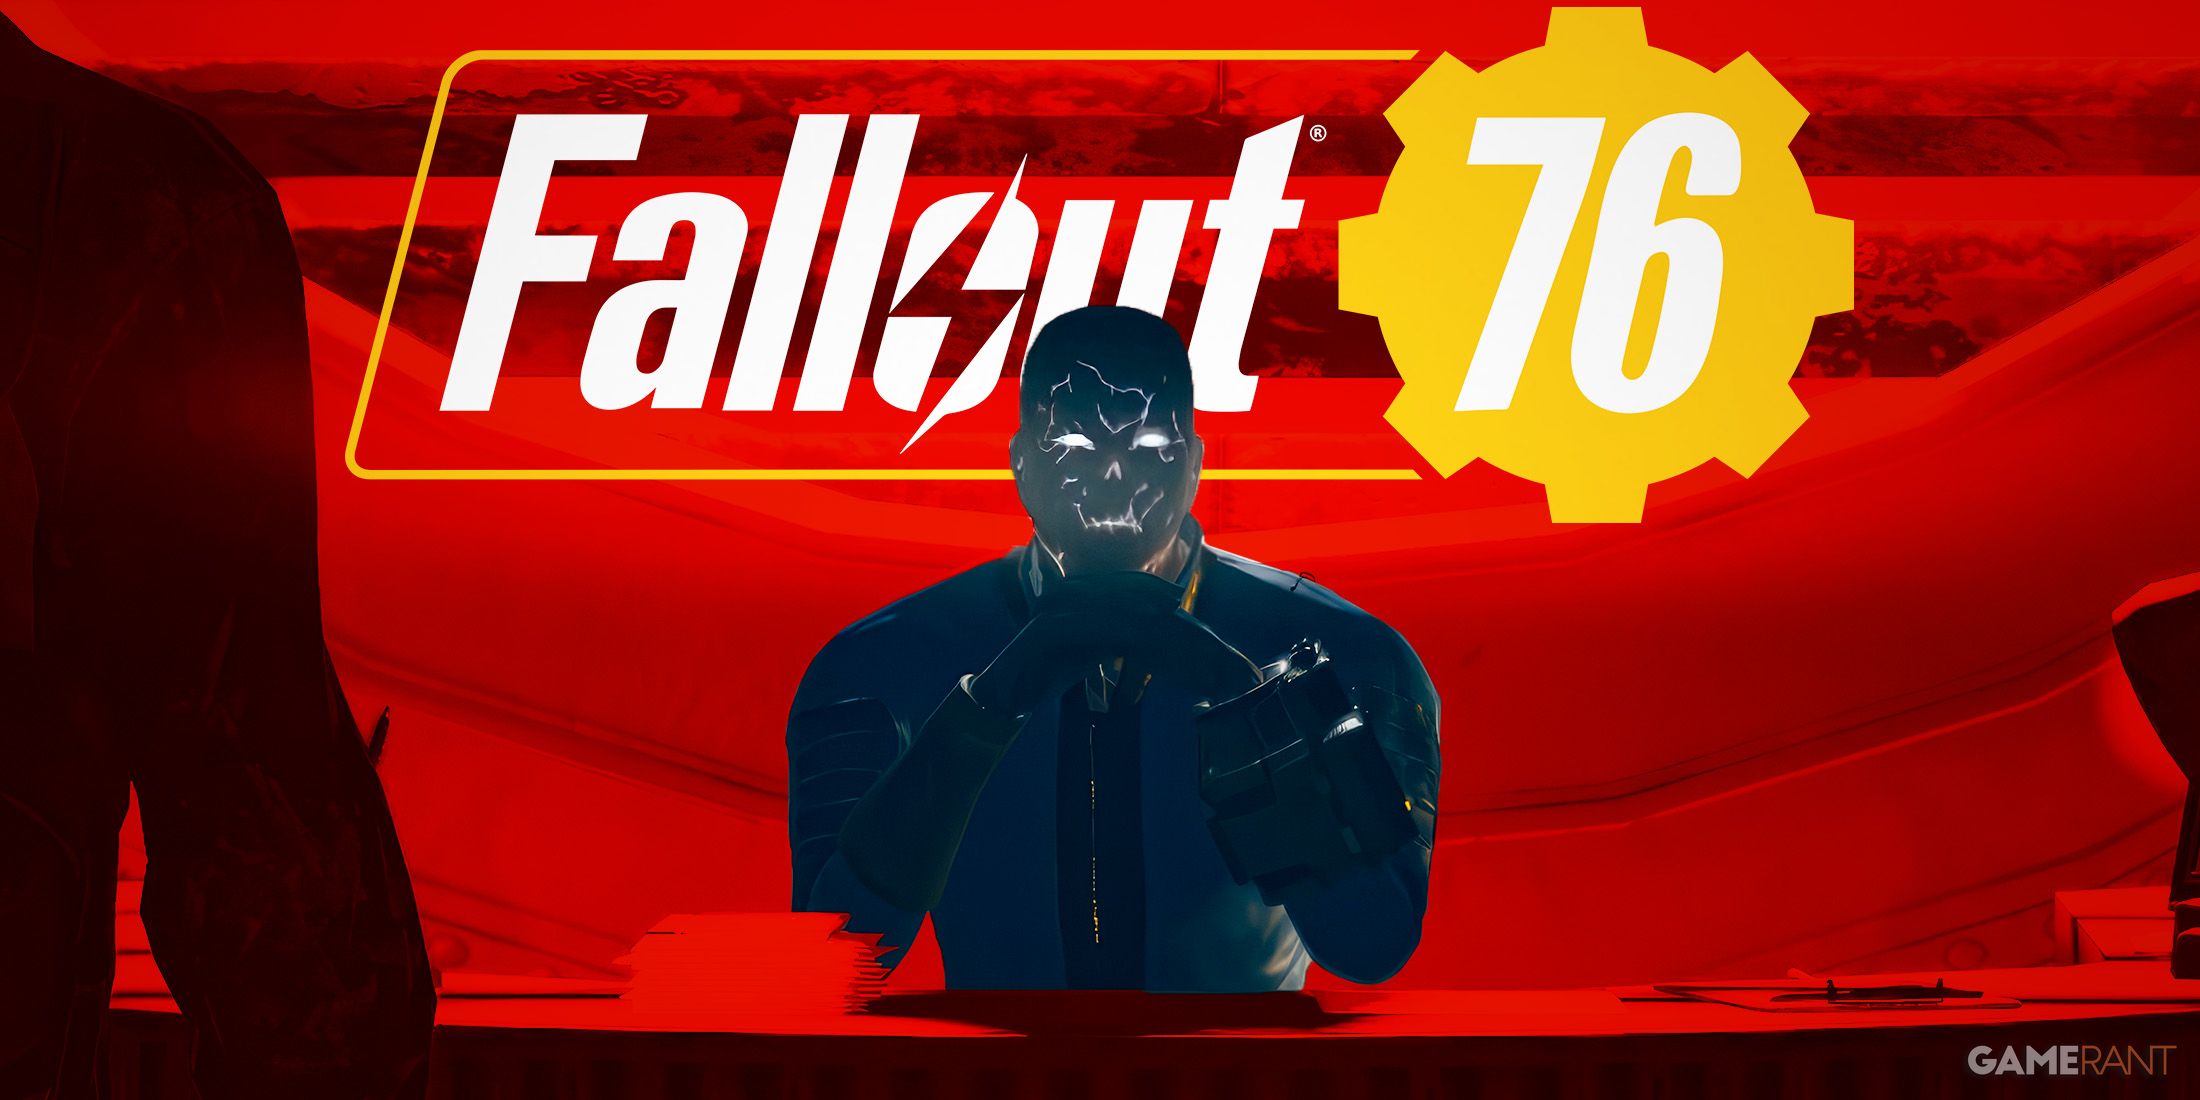 Fallout 76 Hugo Stolz Vault 63 Overseer in front of game logo on red background edit